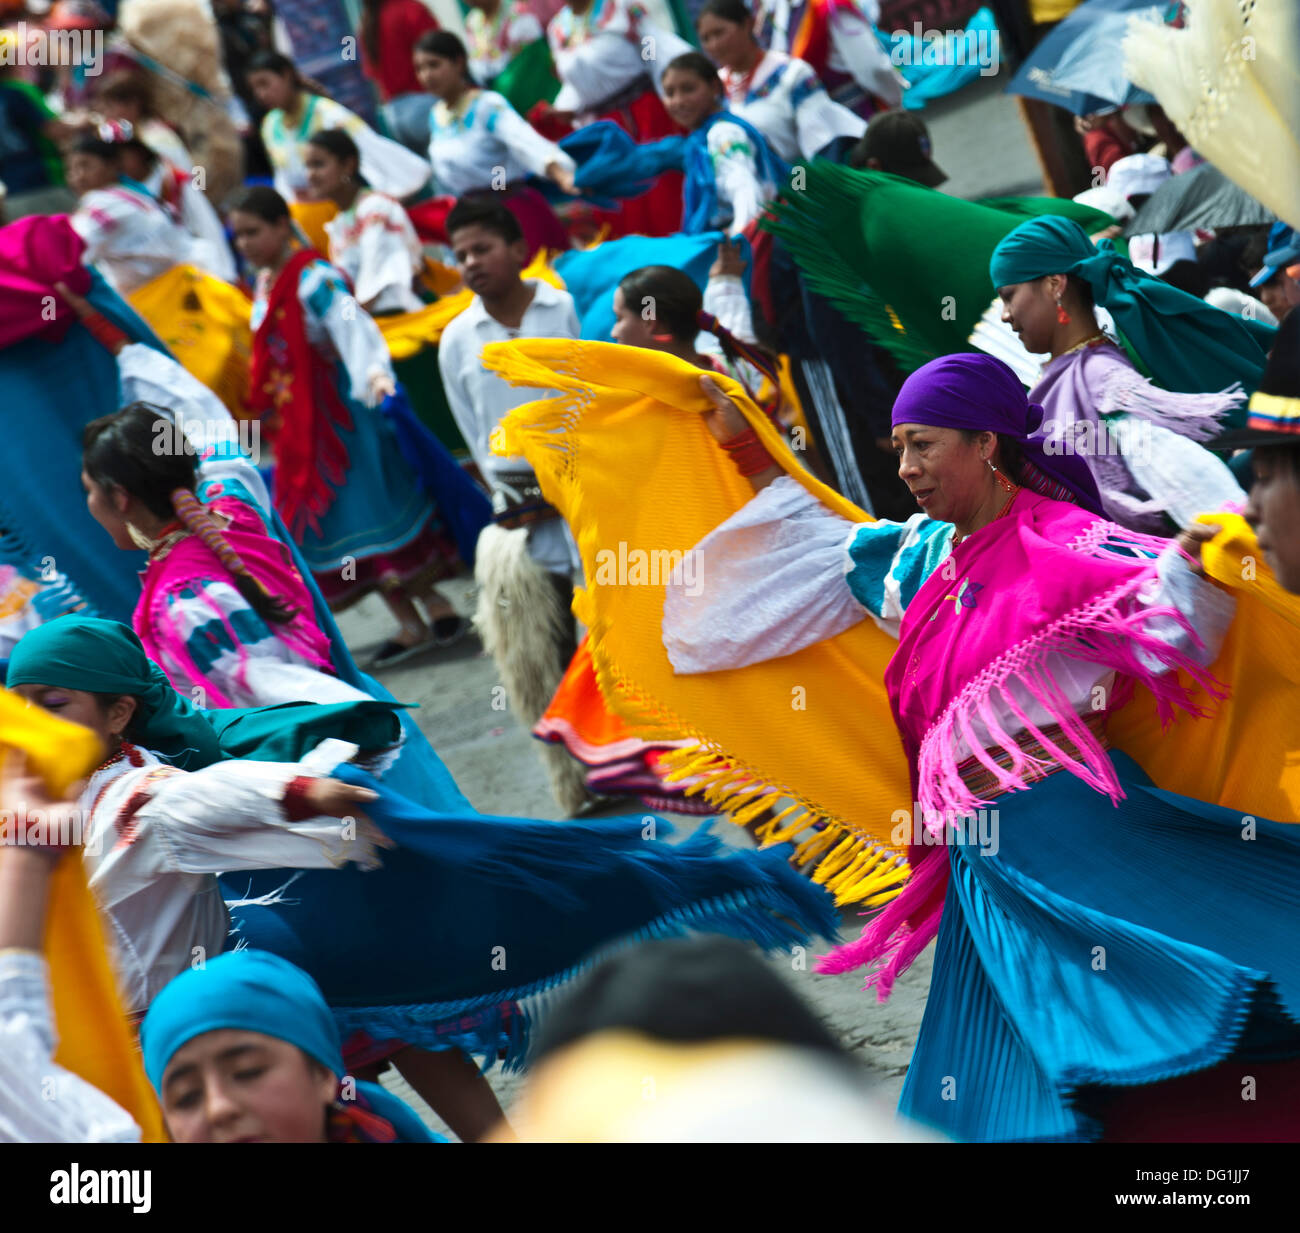 People in traditional Ecuadorean dresses dance as part of a parade through the streets celebrates its Spanish Foundation Stock Photo